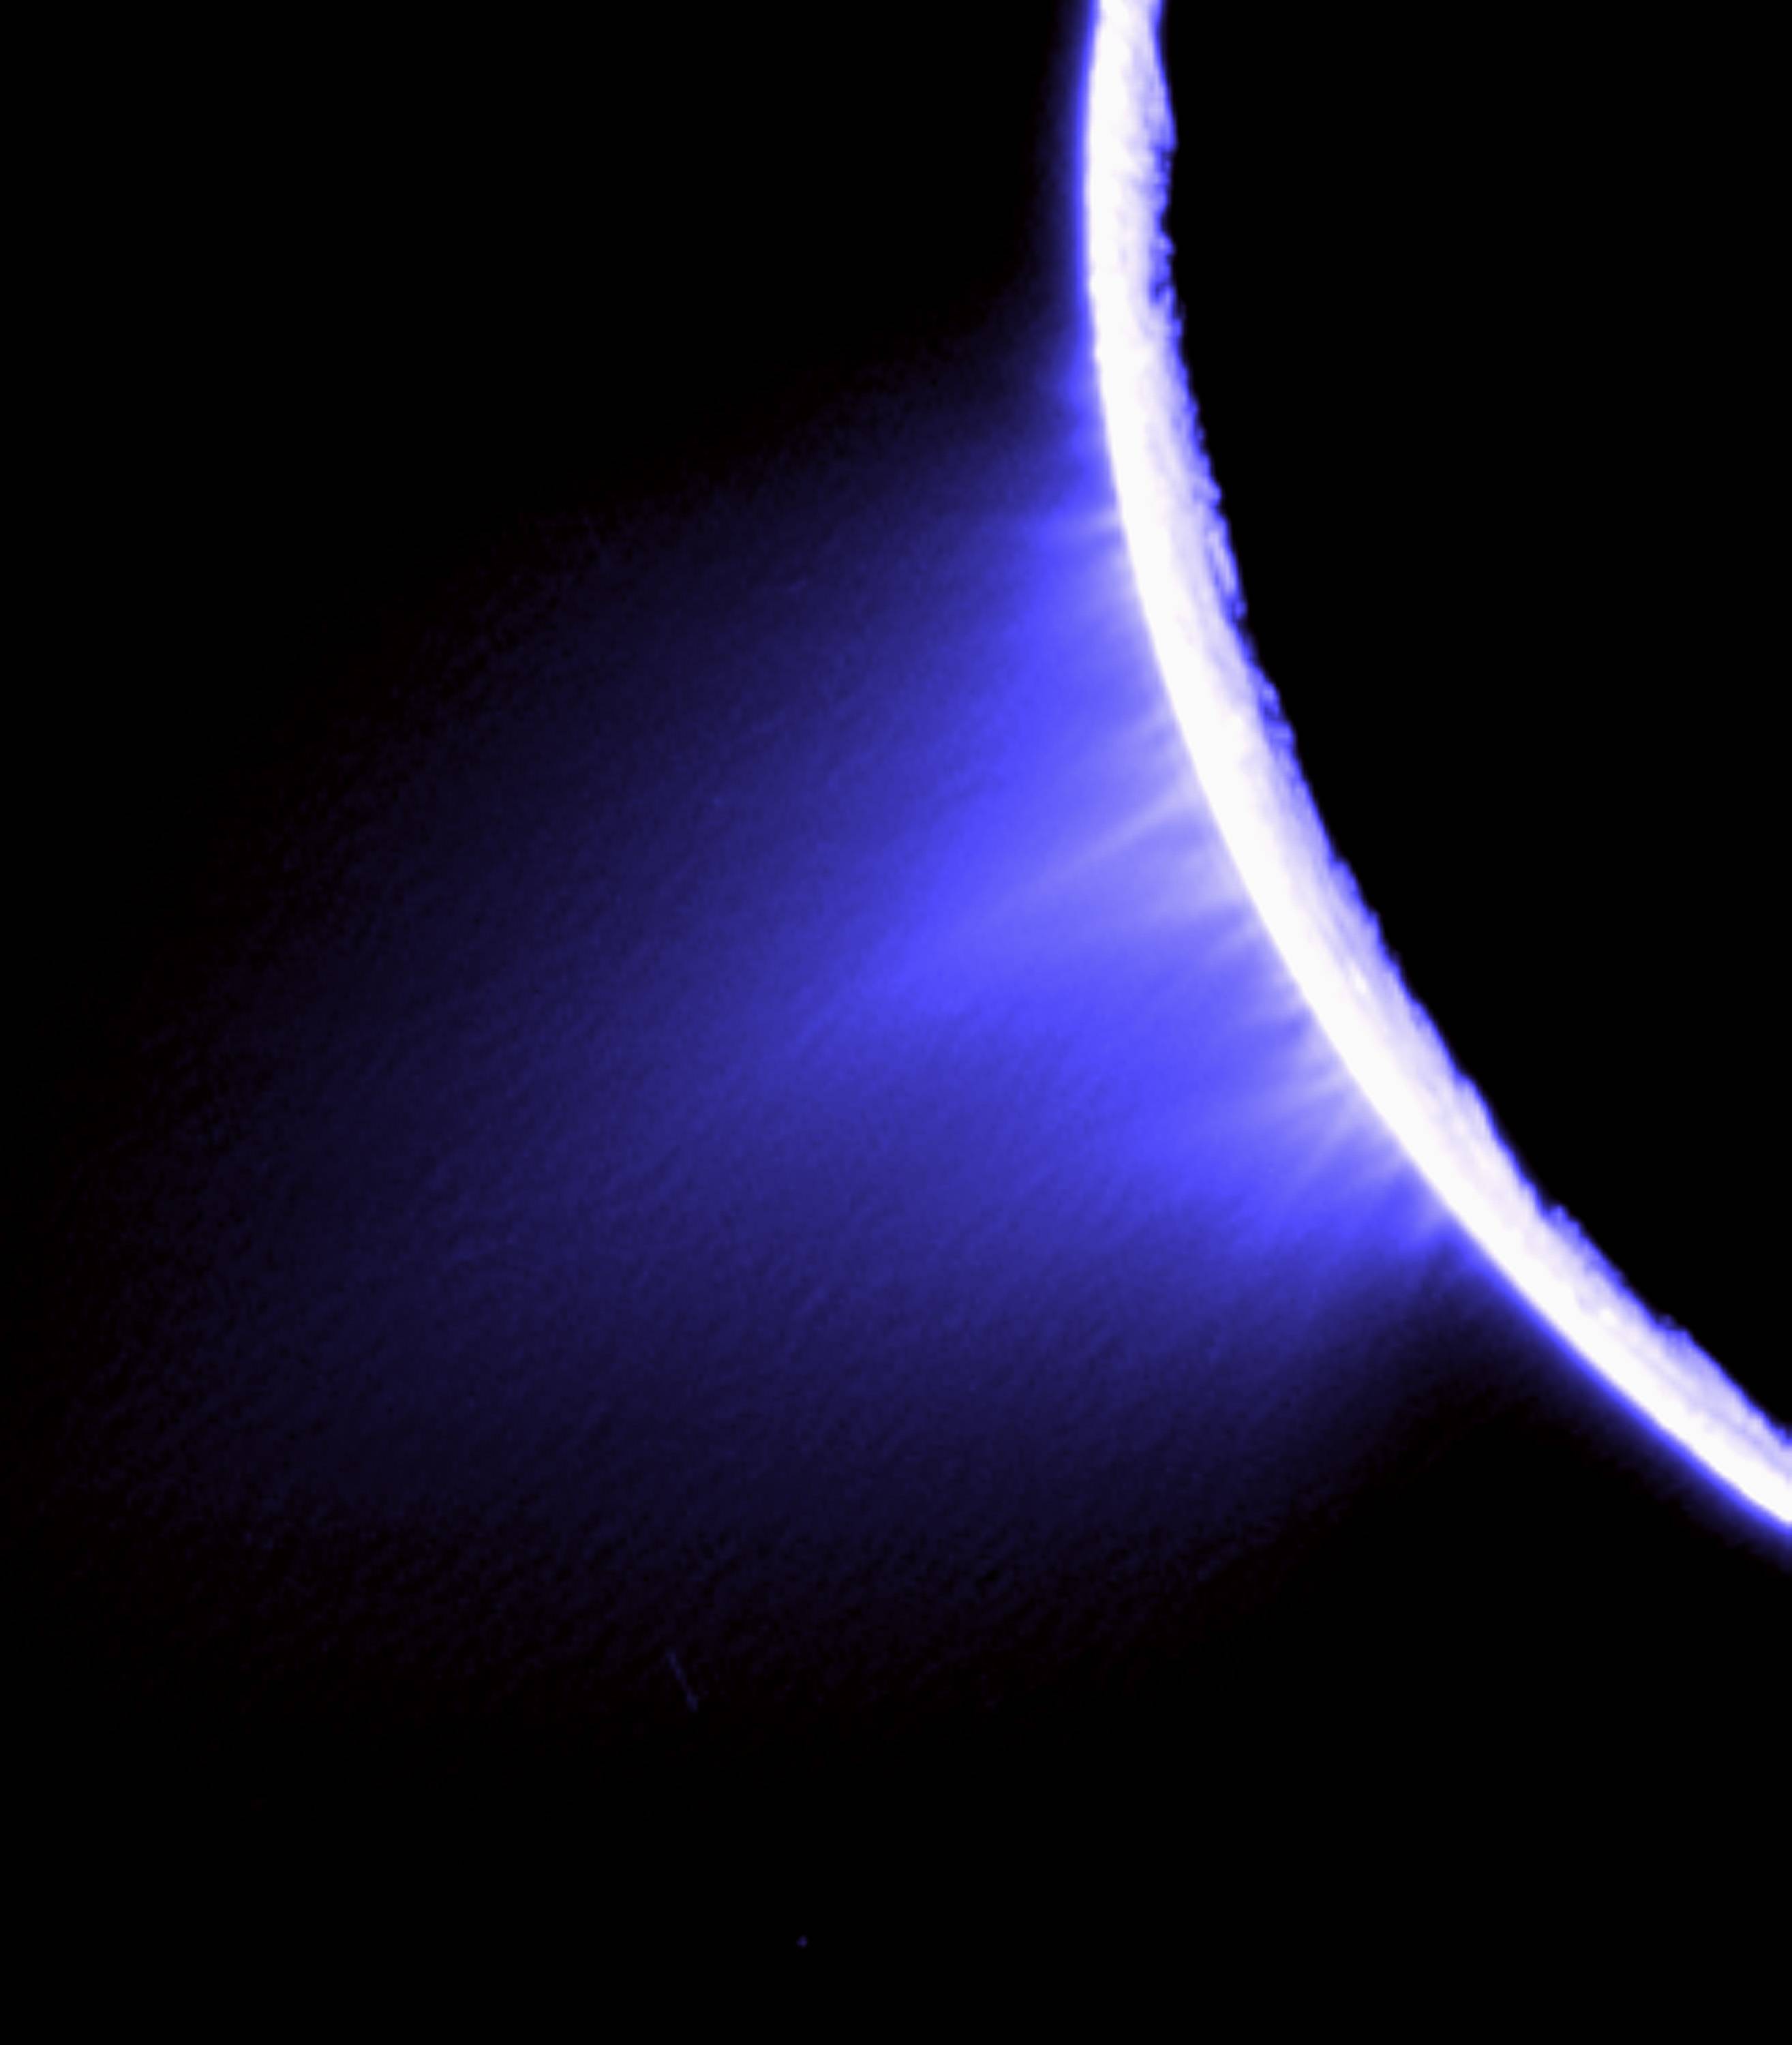 This Cassini spacecraft image released by NASA/JPL/Space Science Institute shows icy geysers spewing from the south polar region of Saturn's moon Enceladus. Cassini spacecraft collected science data on the mysterious geysers and recorded new images of its surface during a close flyby, NASA's Jet Propulsion Laboratory said March 13, 2008. The pass on March 12 brought Cassini as close as 30 miles to the surface of the moon. It went through the icy geysers at 32,000 mph (51,499kph) and an altitude of 120 miles (193kms), the lab said.     AFP PHOTO/NASA/JPL/Space Science Institute    =GETTY OUT= / AFP PHOTO / NASA/JPL/Space Science Institute